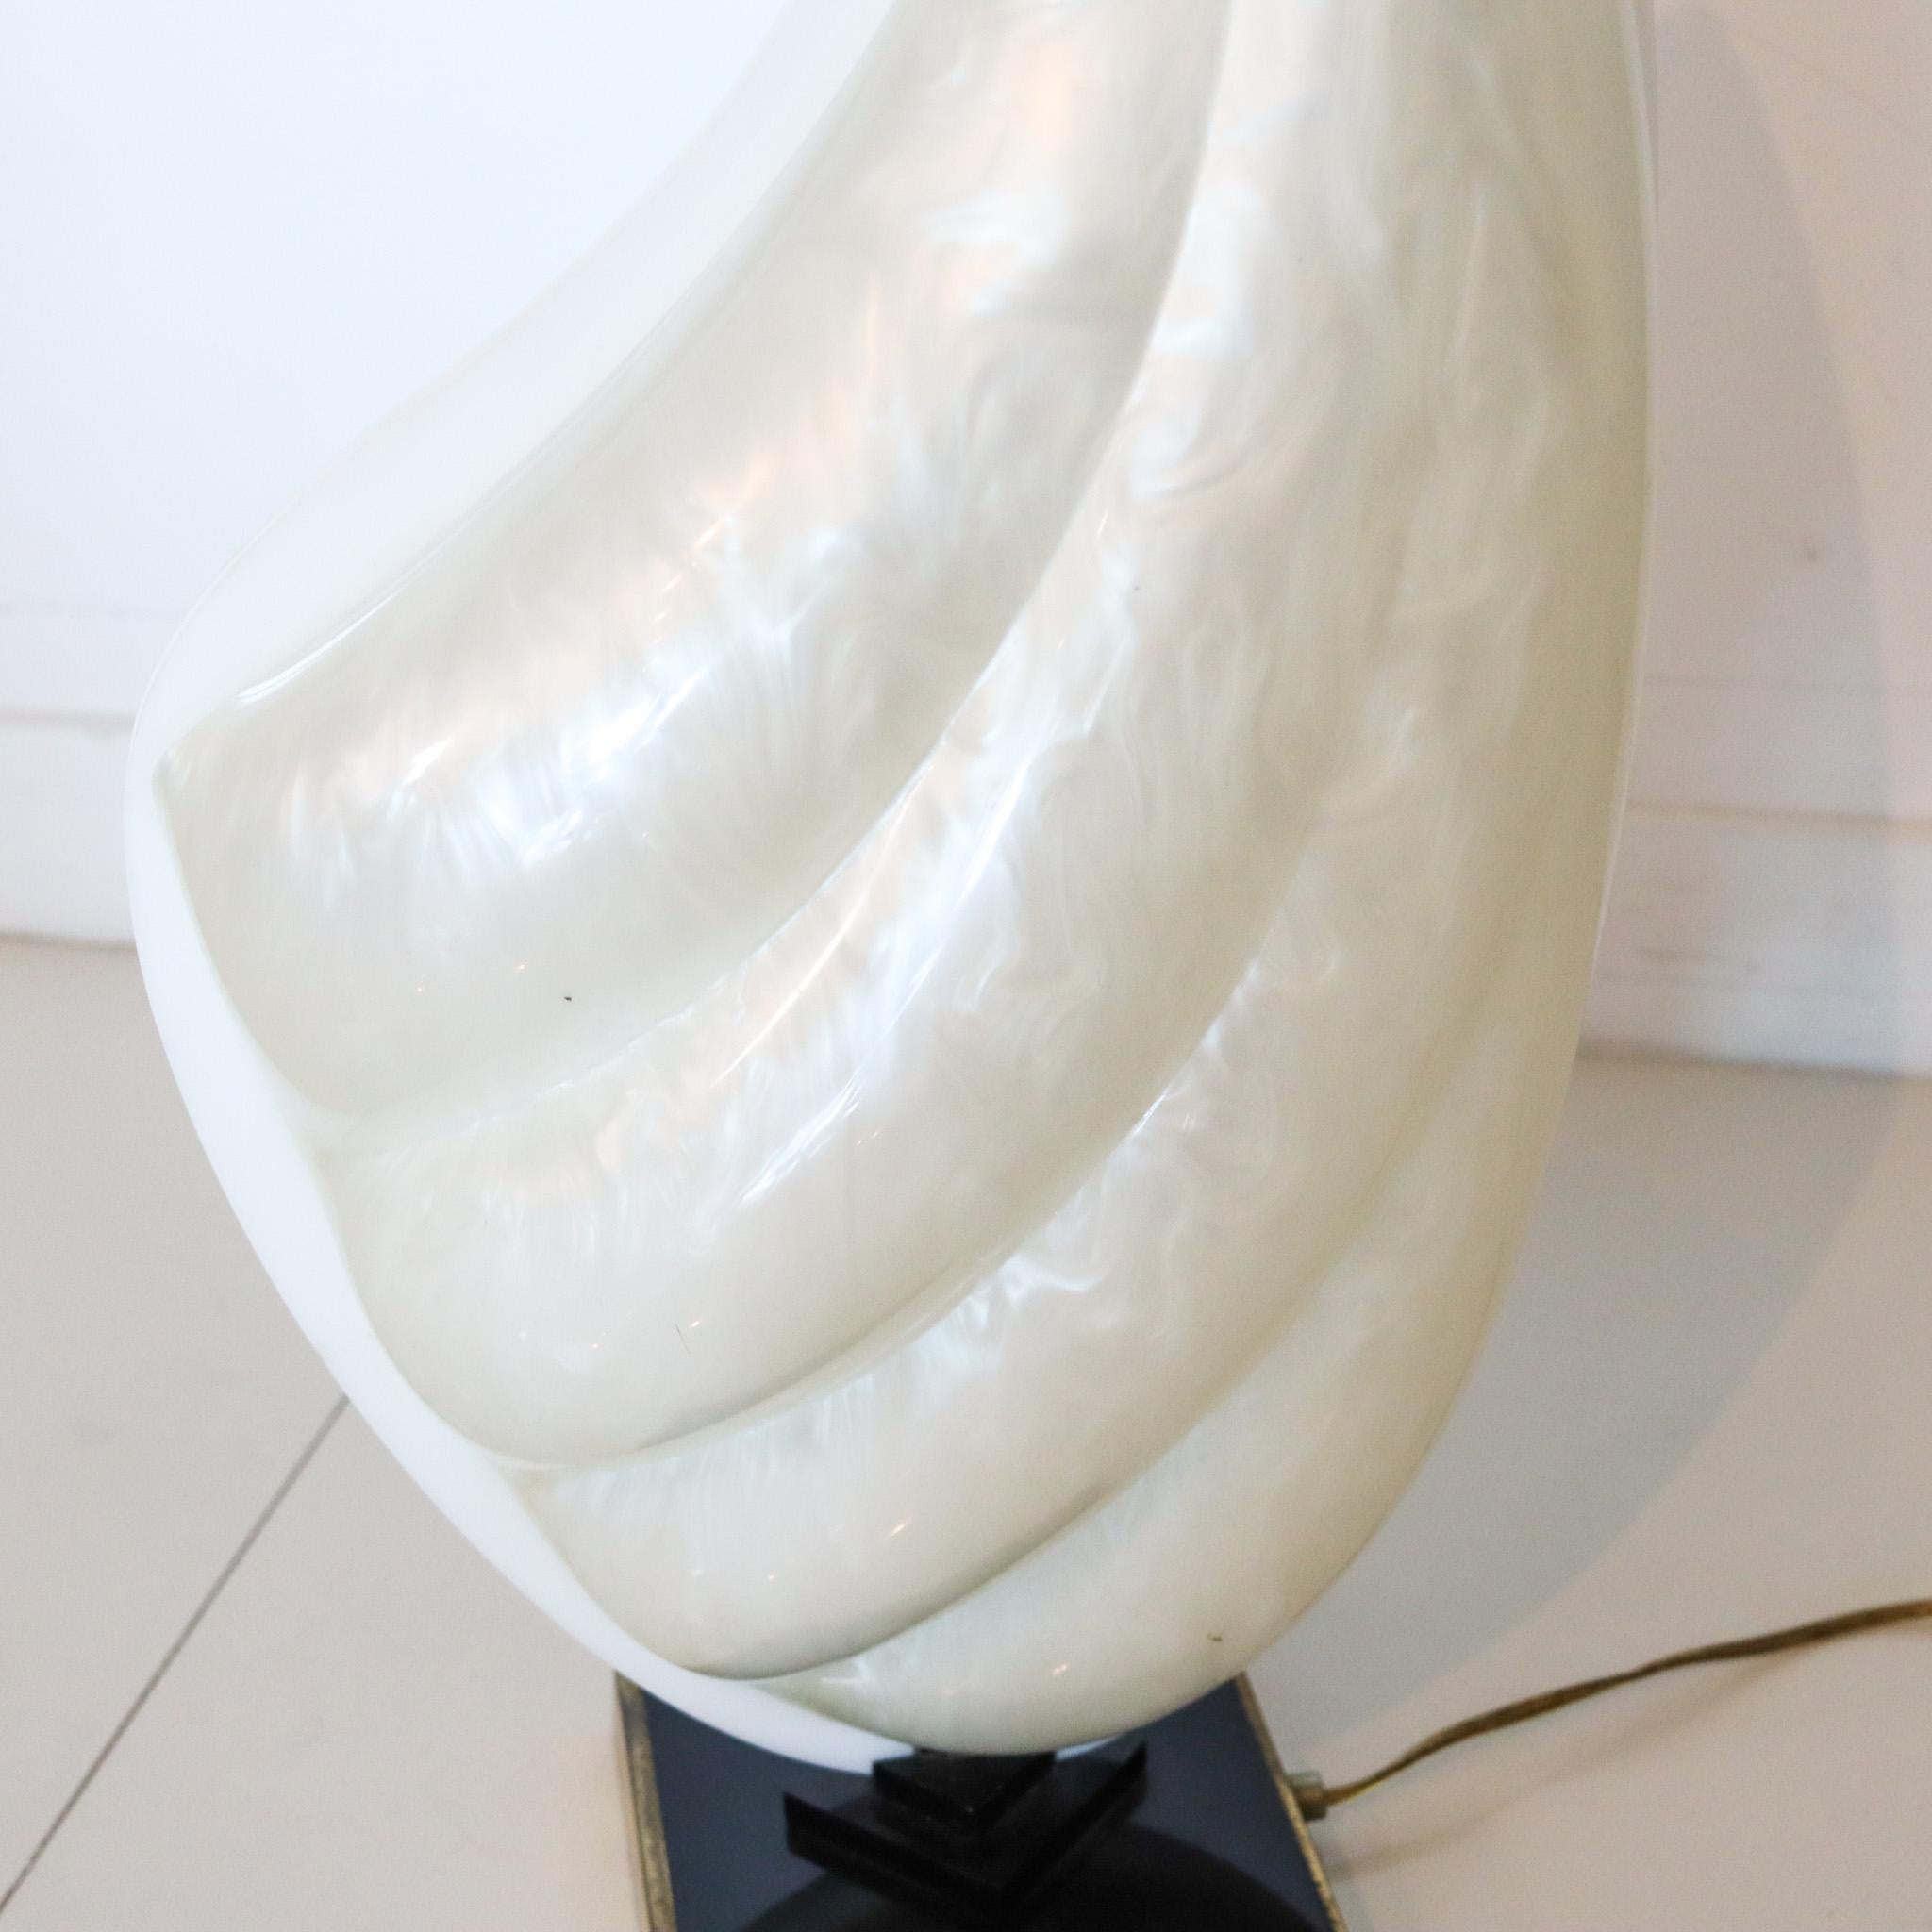 Table lamp designed by Roger Rougier (1926-1993).

A vintage sculptural modernist piece, created by the French-Canadian designer Roger Rougier, back in the 1970's. It was designed in the shape of a tall Clam and crafted with white milky acrylics.